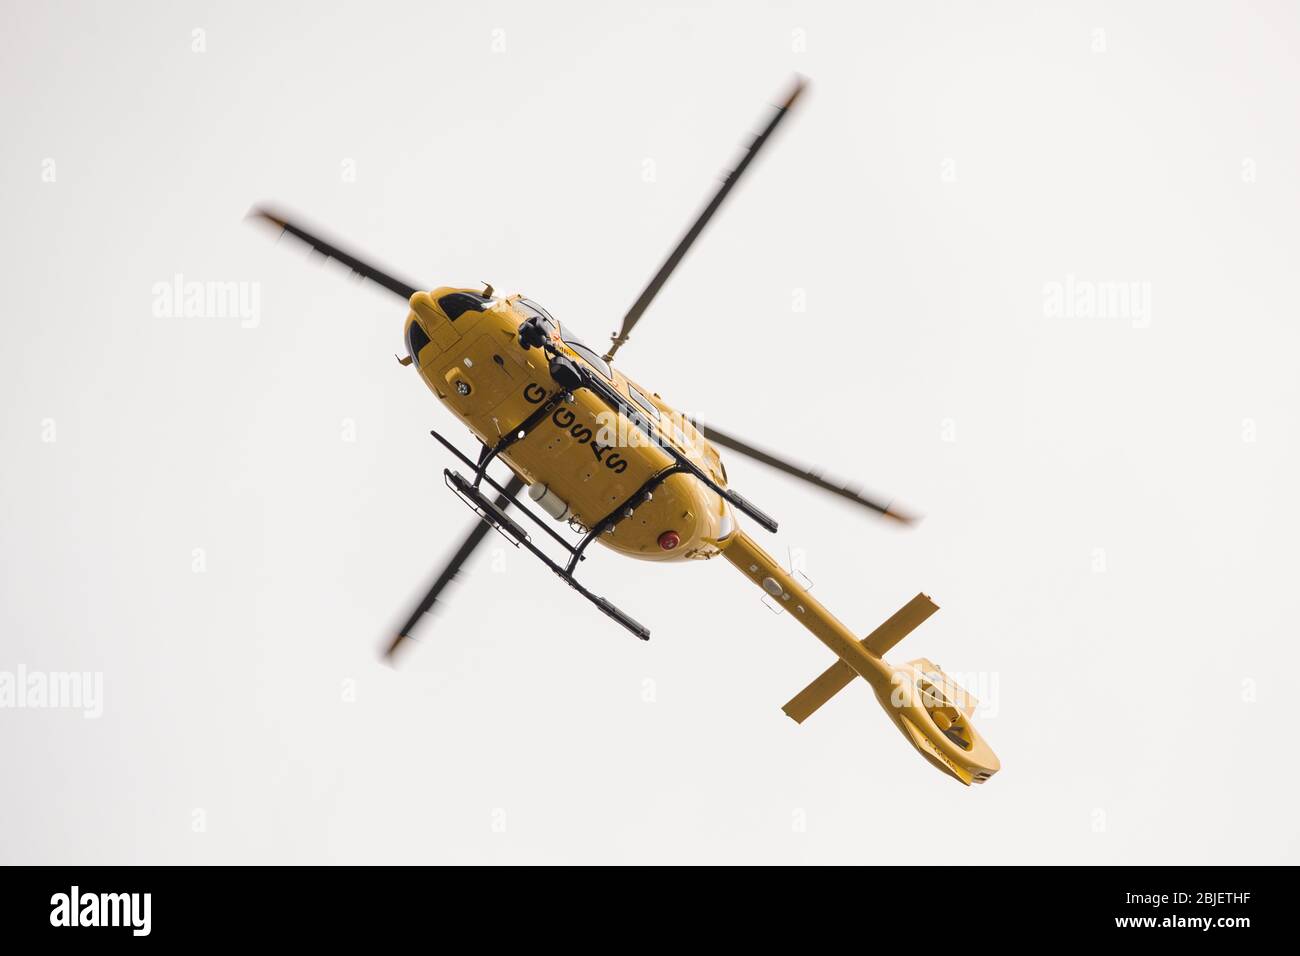 Glasgow, UK. 28 April 2020.   Pictured: Scottish Air Ambulance Service helicopter (Airbus Helicopter H145 / EC145T2) seen about to land at the Queen Elizabeth University Hospital transferring more Covid-19 patients. Credit: Colin Fisher/Alamy Live News. Stock Photo